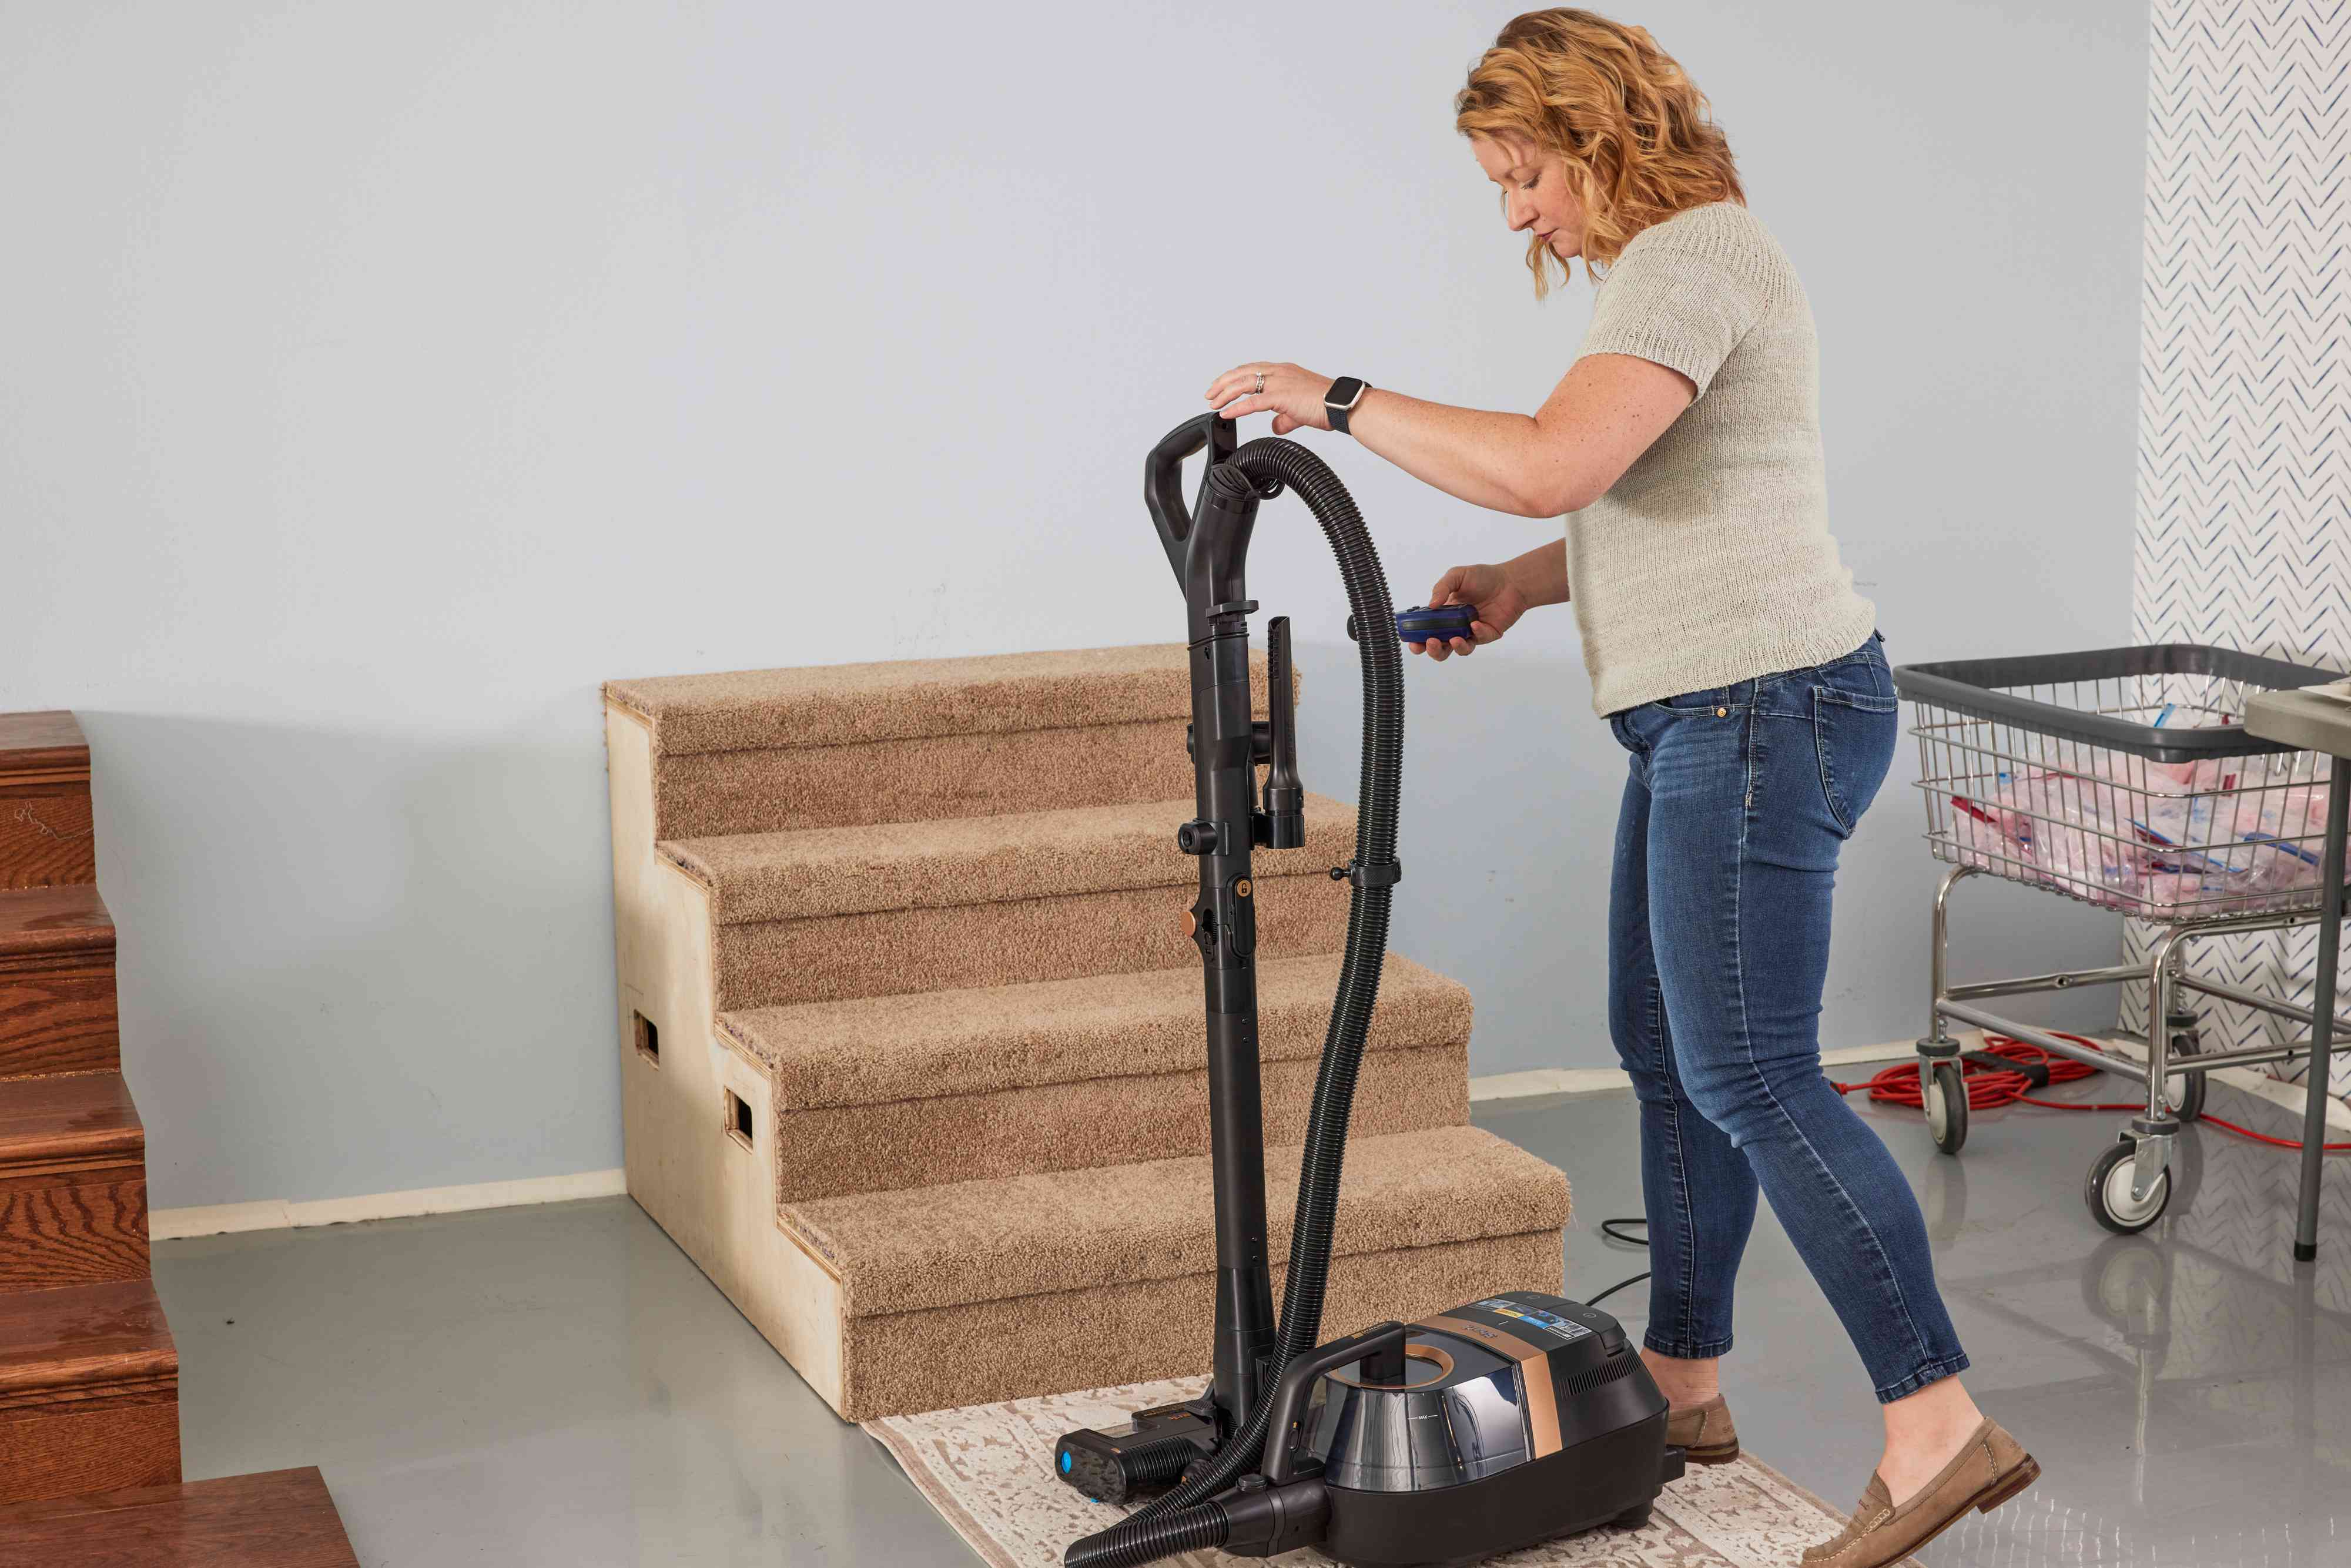 tester with the Shark CZ2001 Vertex Canister Vacuum to try on carpeted stairs